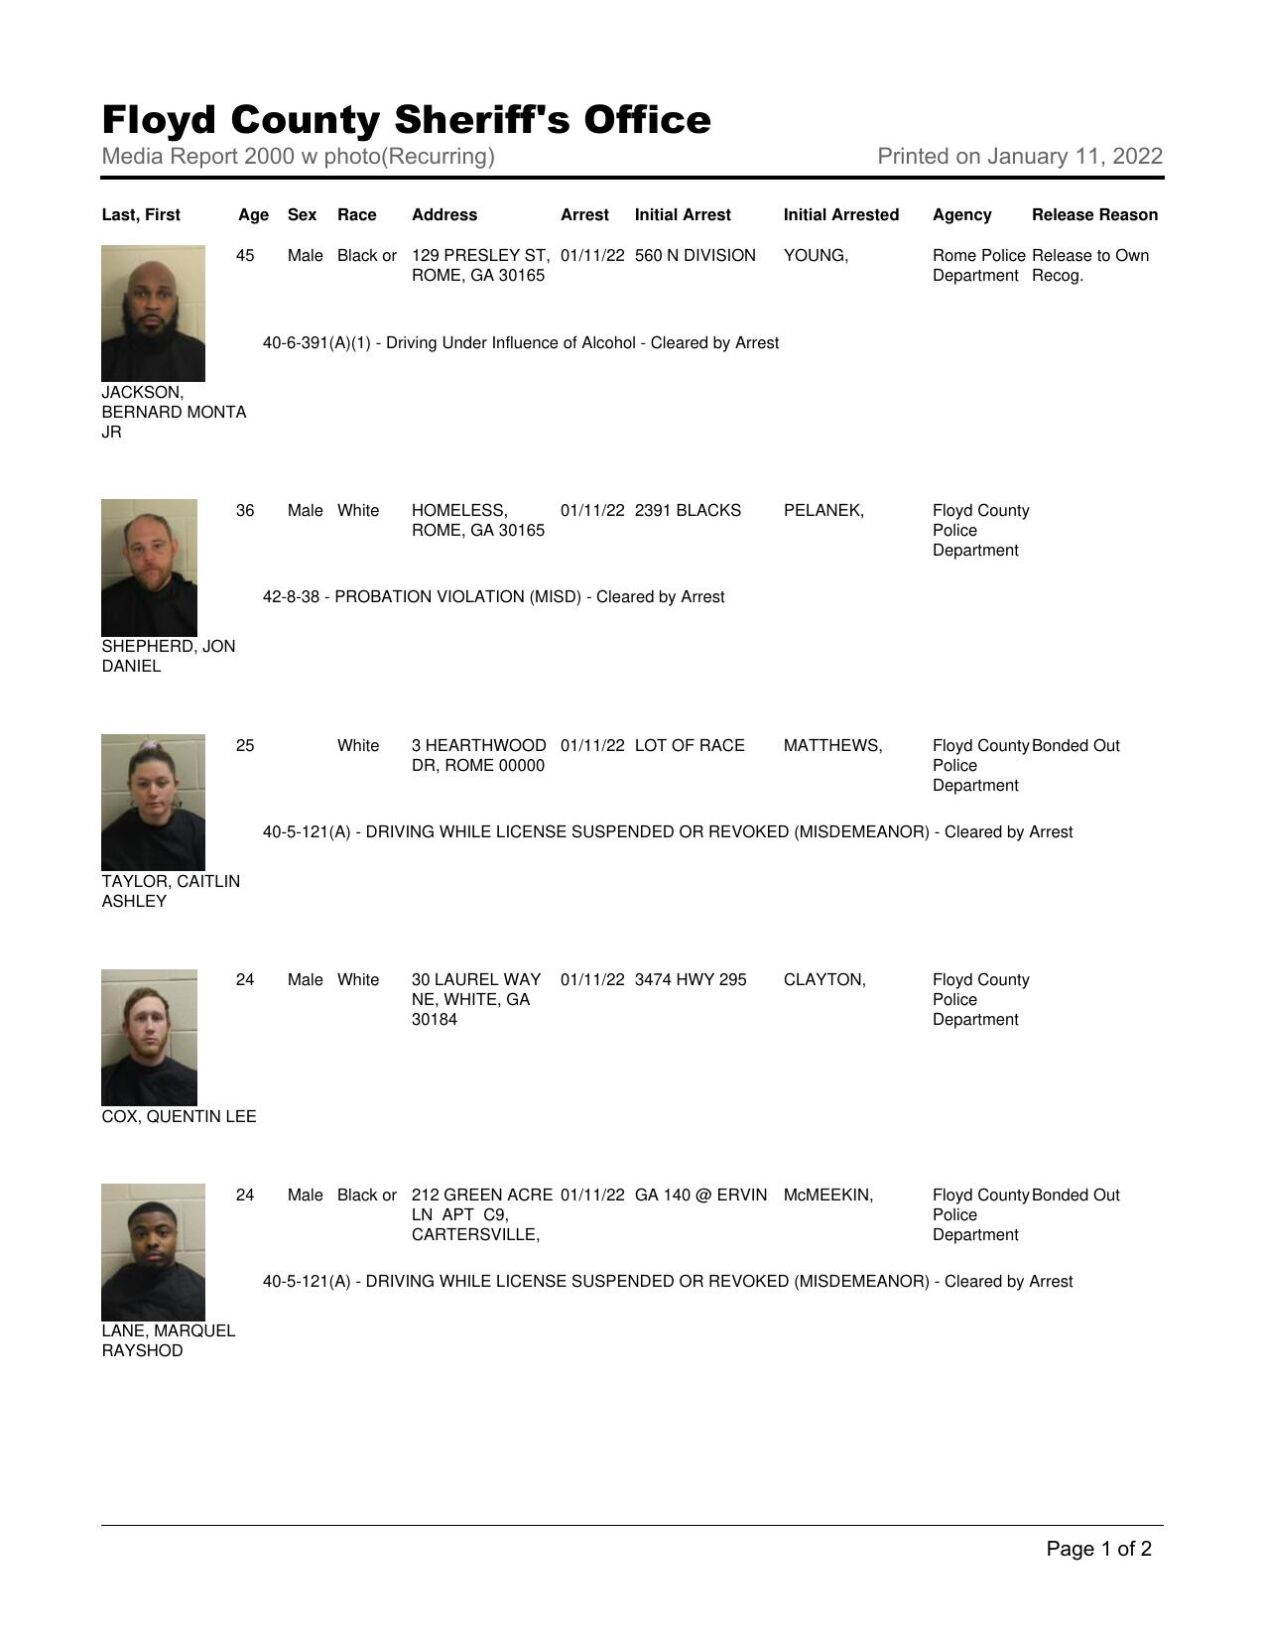 Floyd County Jail report for 8 pm Tuesday, Jan. 11